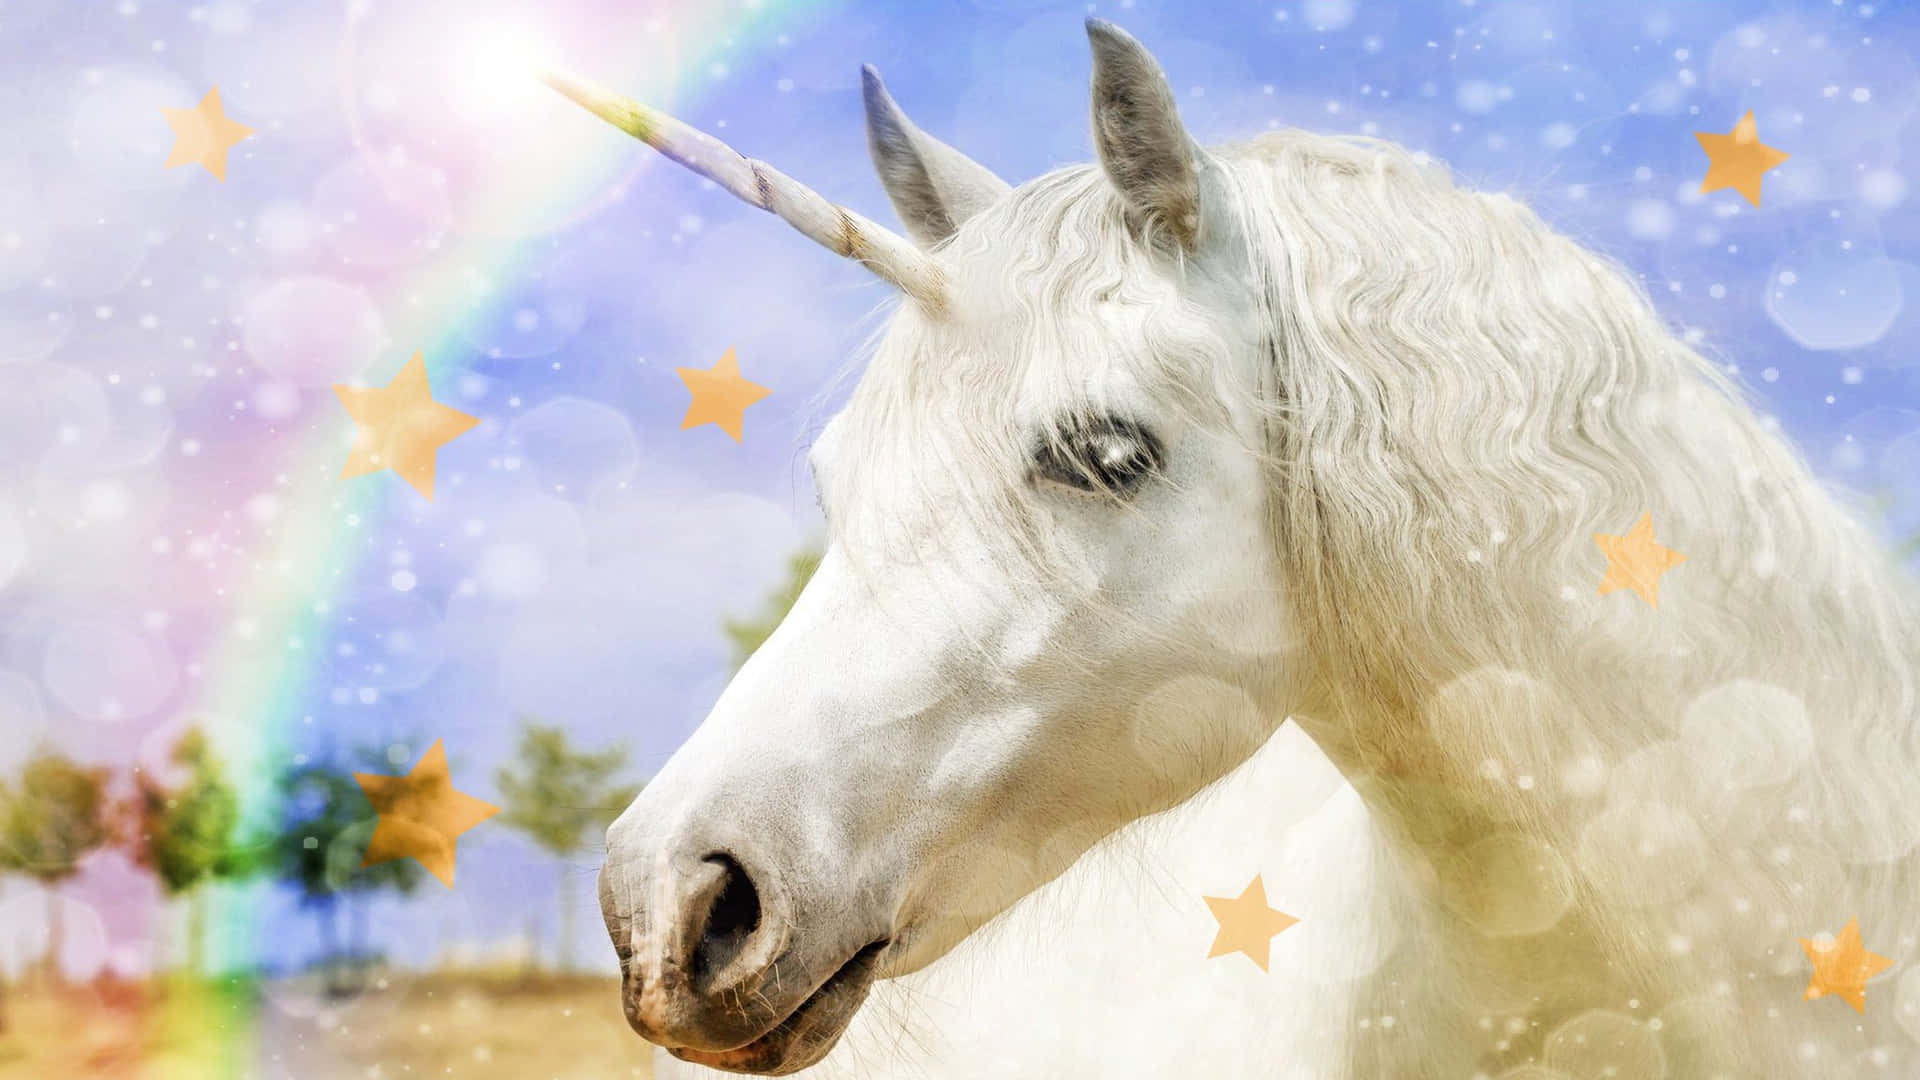 Discover the magical world of Real Unicorns